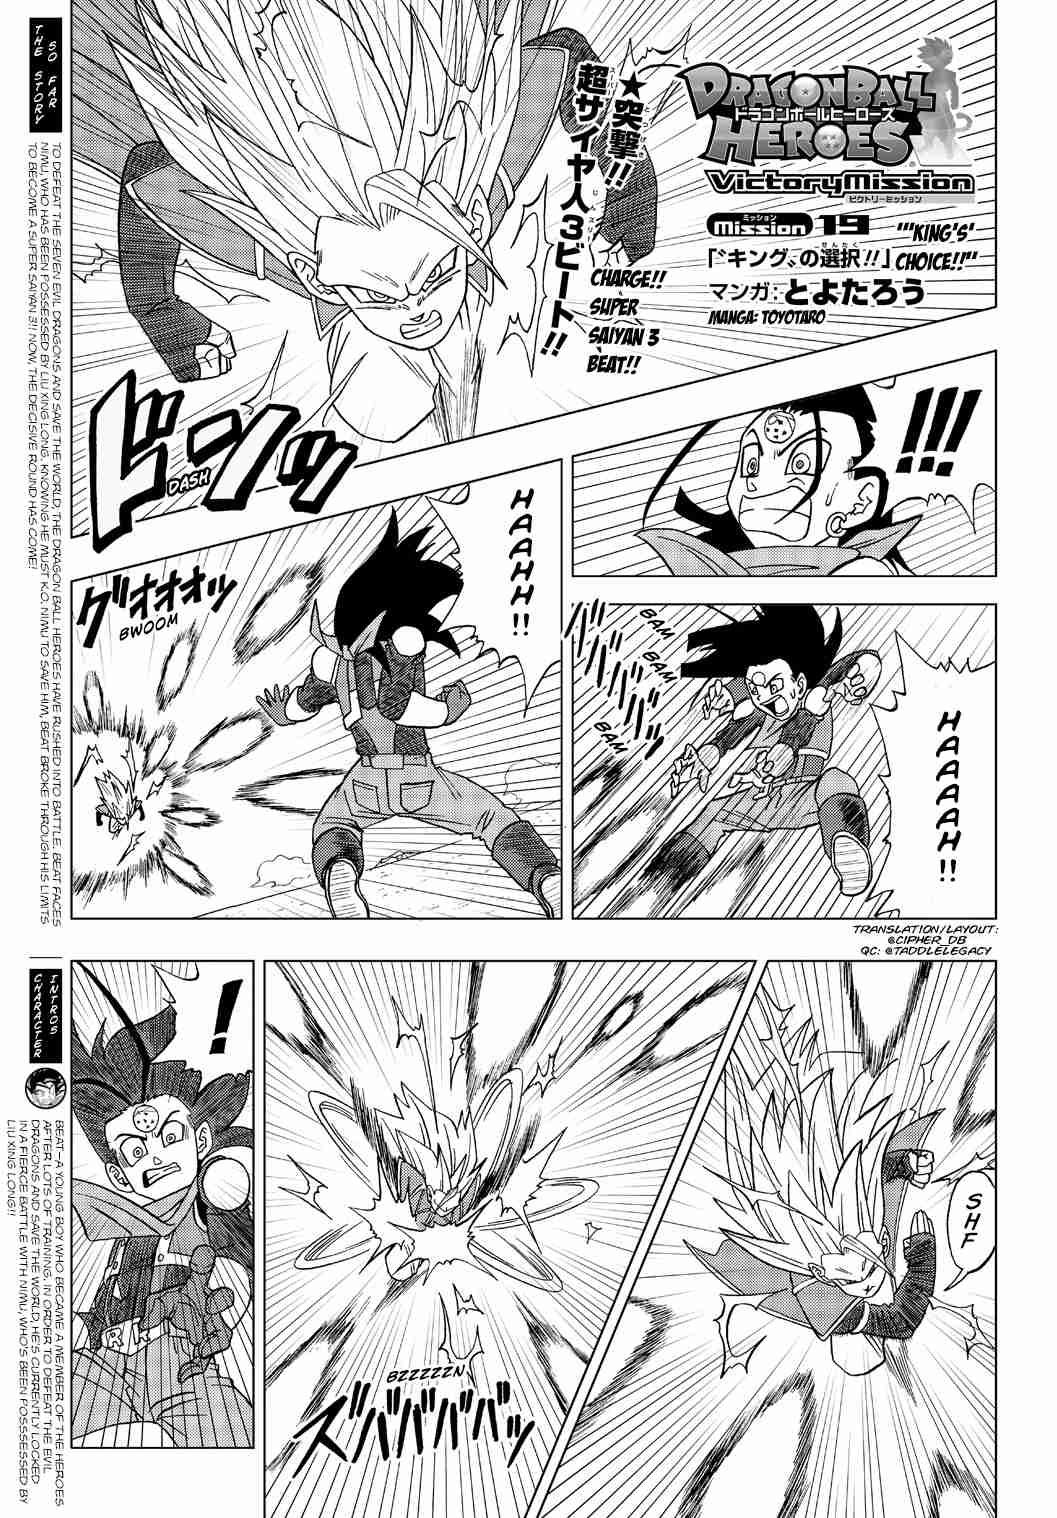 Dragon Ball Heroes Victory Mission Ch. 19 "King's" Choice!!